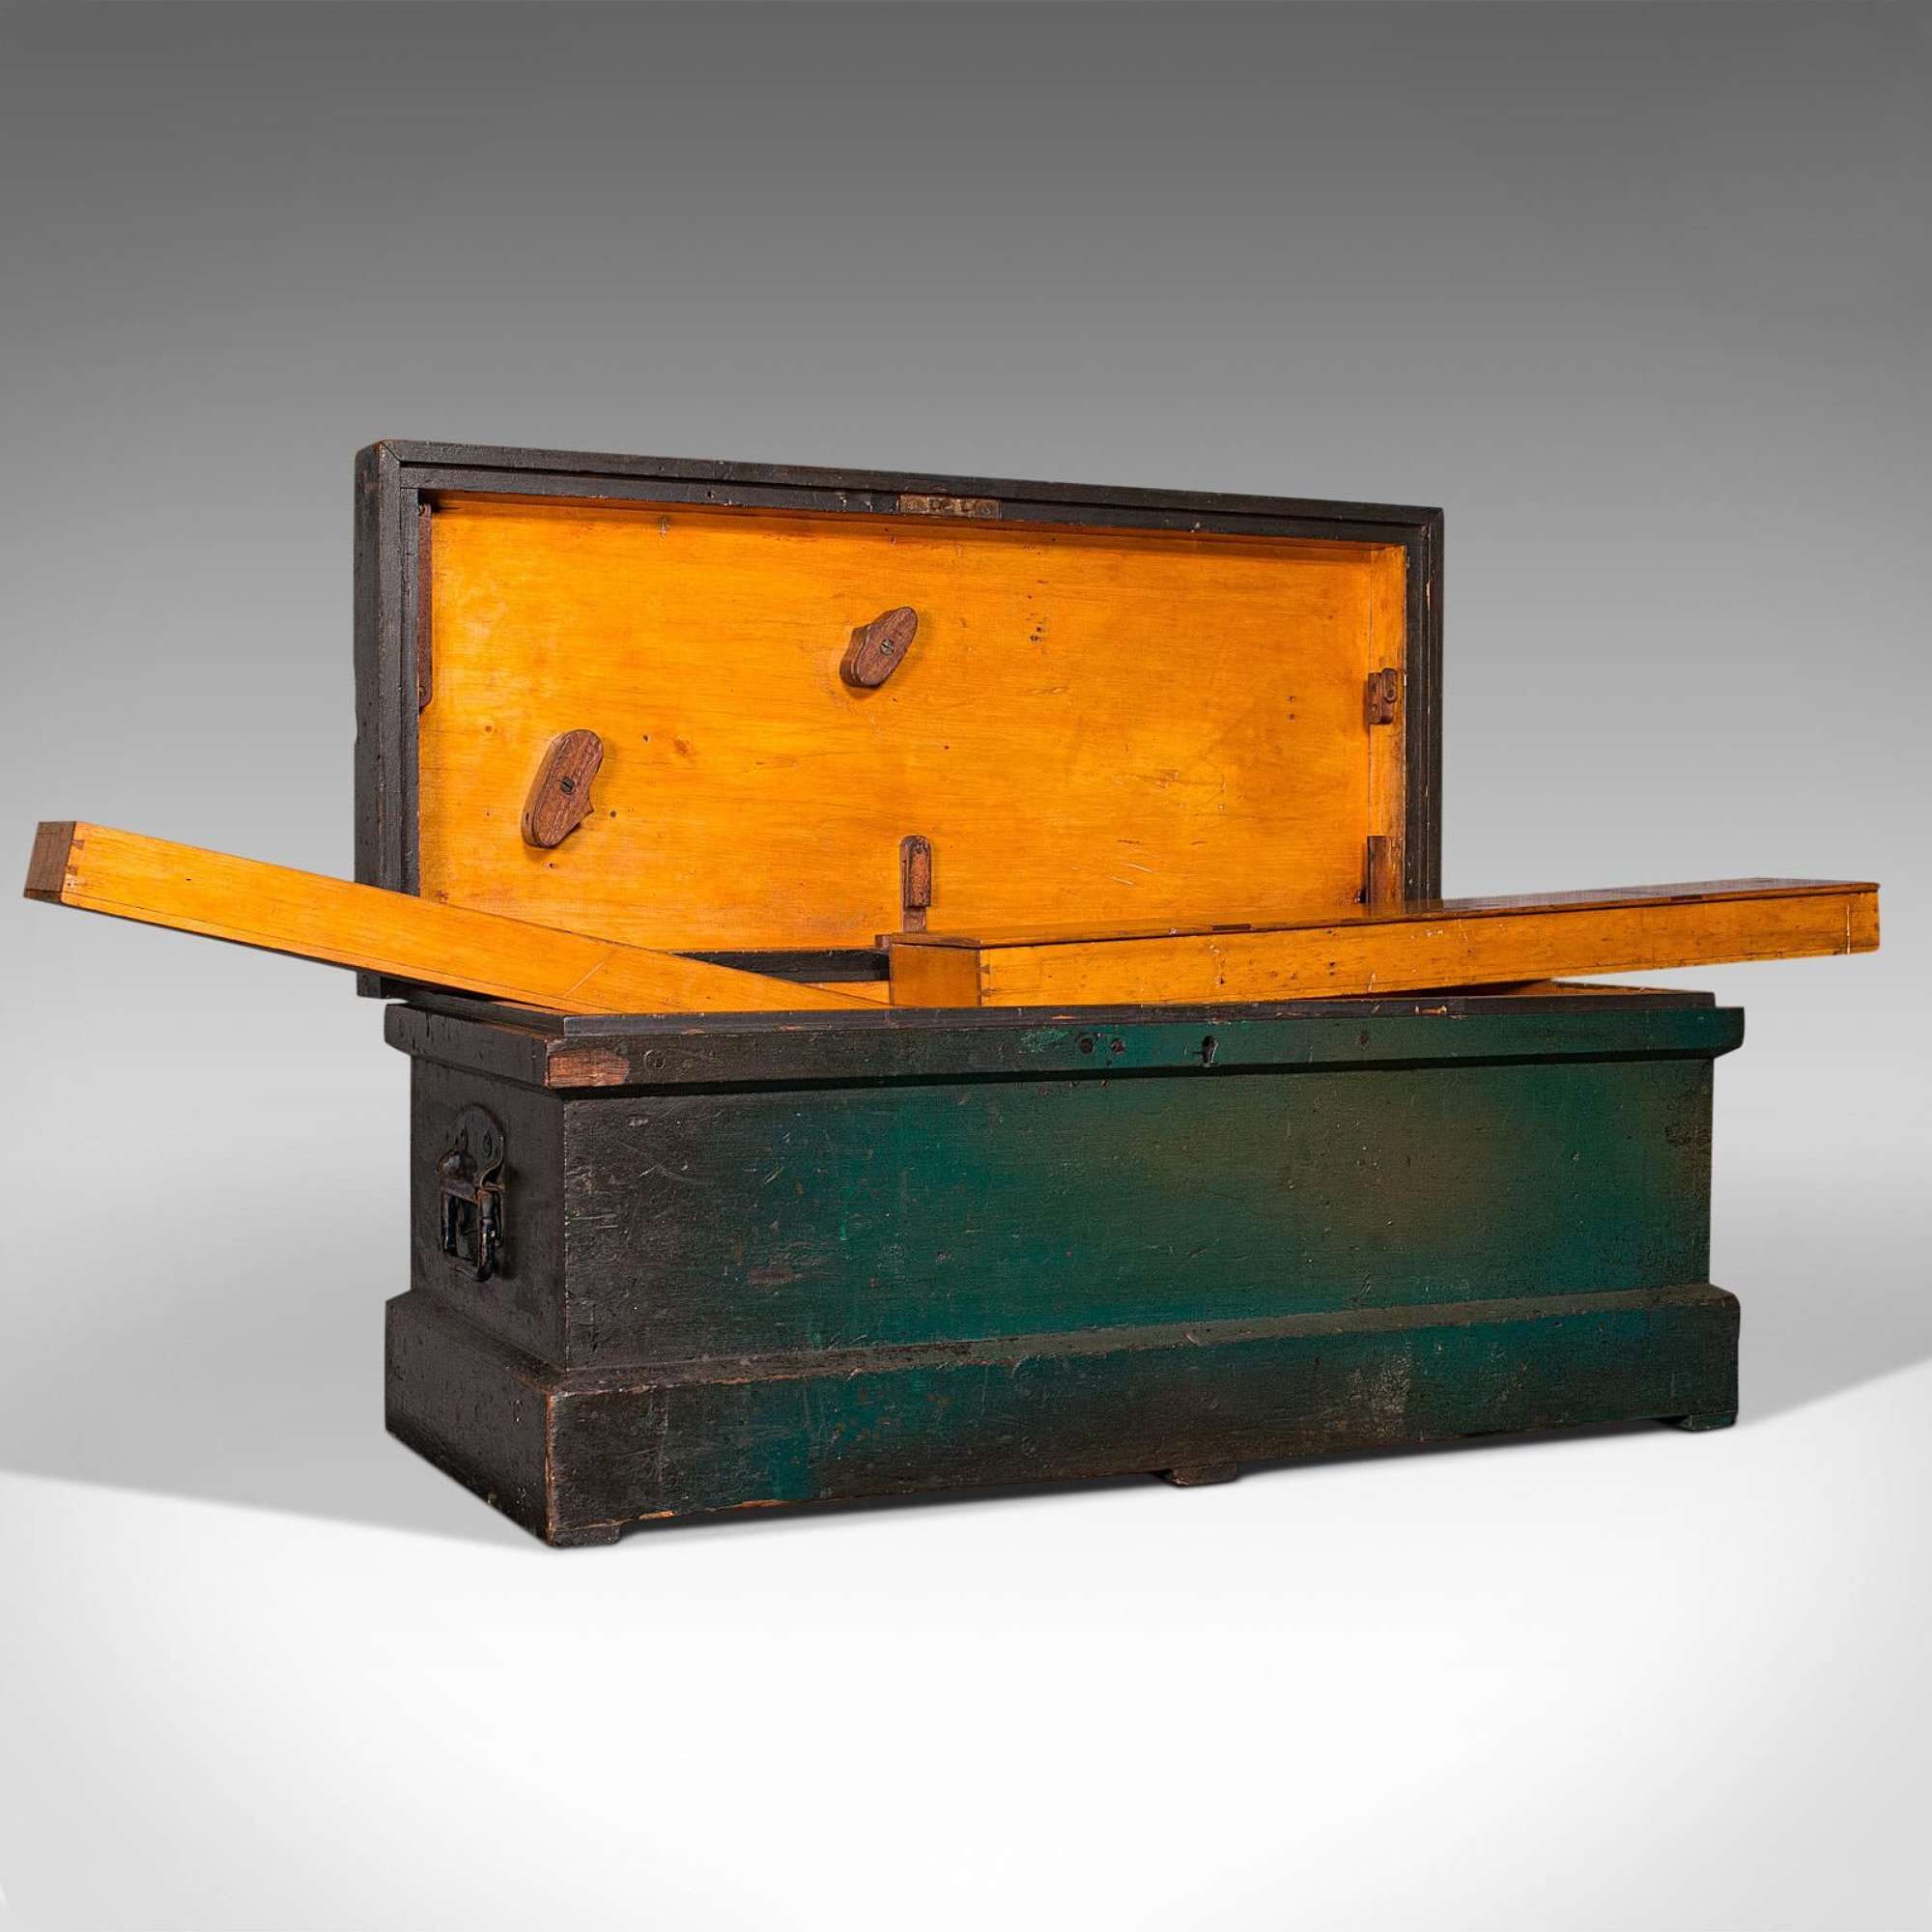 Antique Shipwright's Chest, English, Craftsman's Tool Trunk, Victorian C.1900